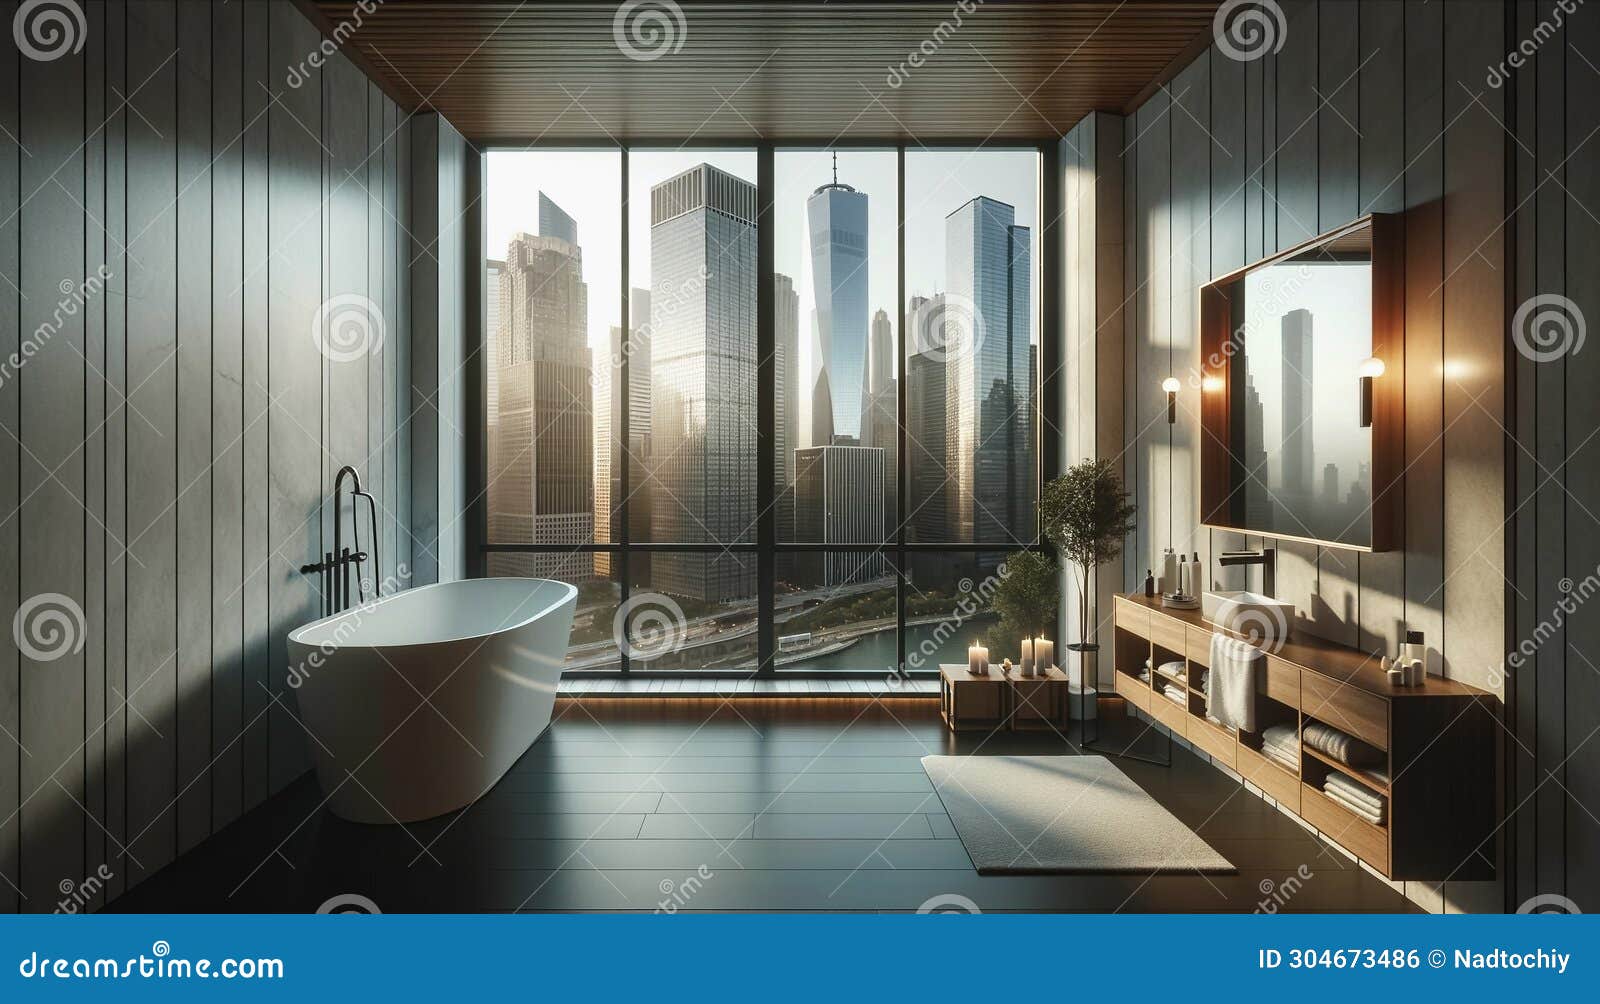 A Modern Bathroom Interior with Large Windows Offering a View of ...